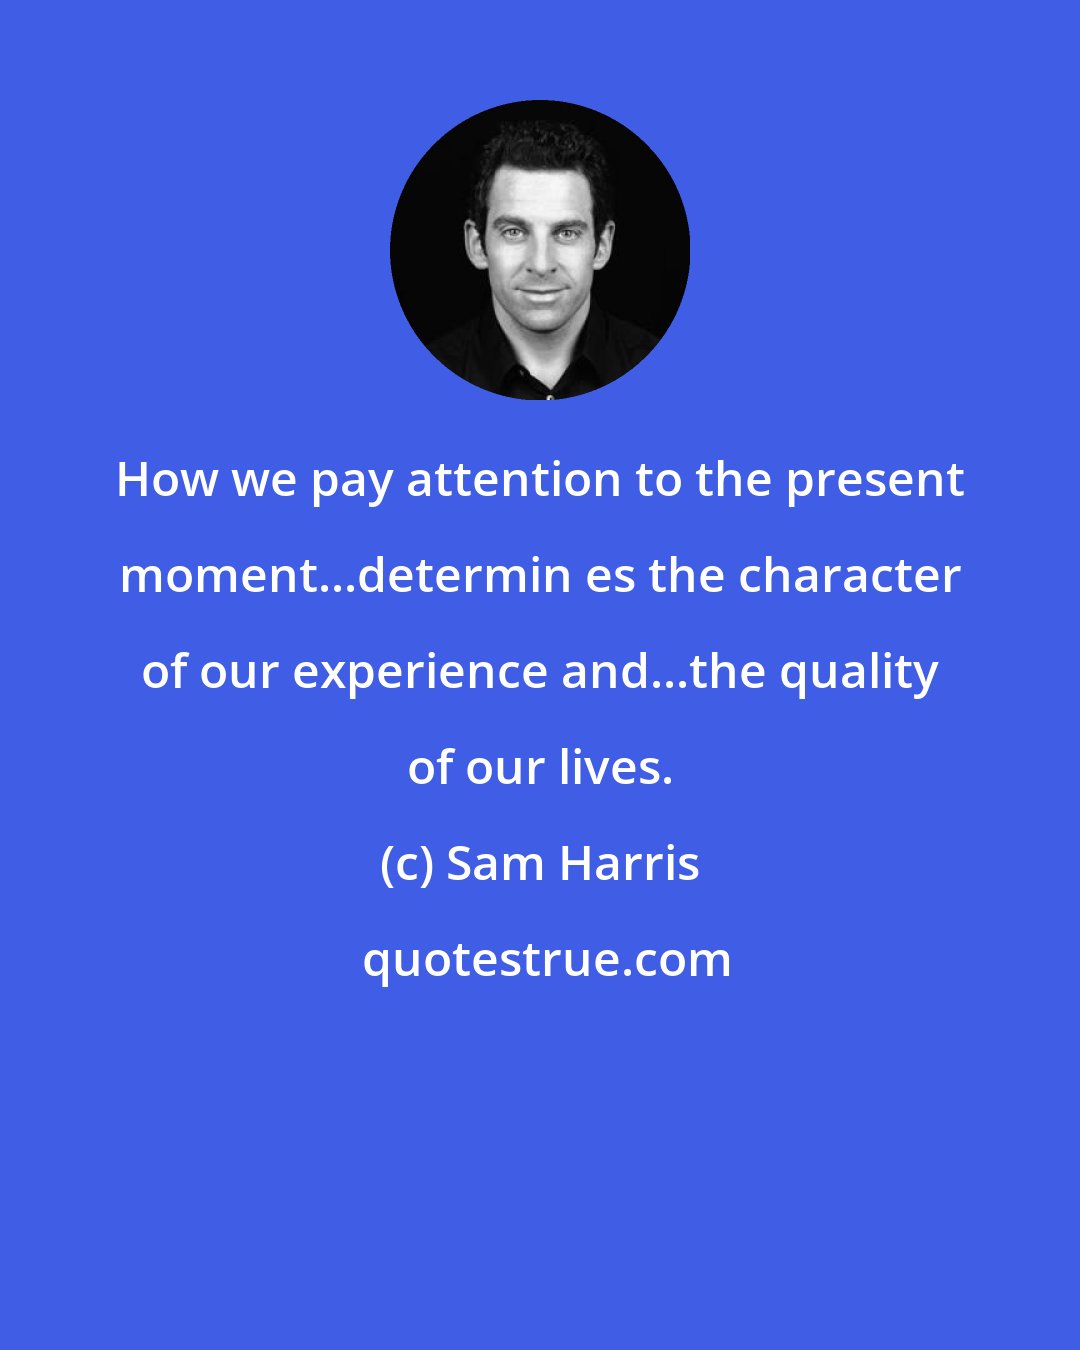 Sam Harris: How we pay attention to the present moment...determin es the character of our experience and...the quality of our lives.